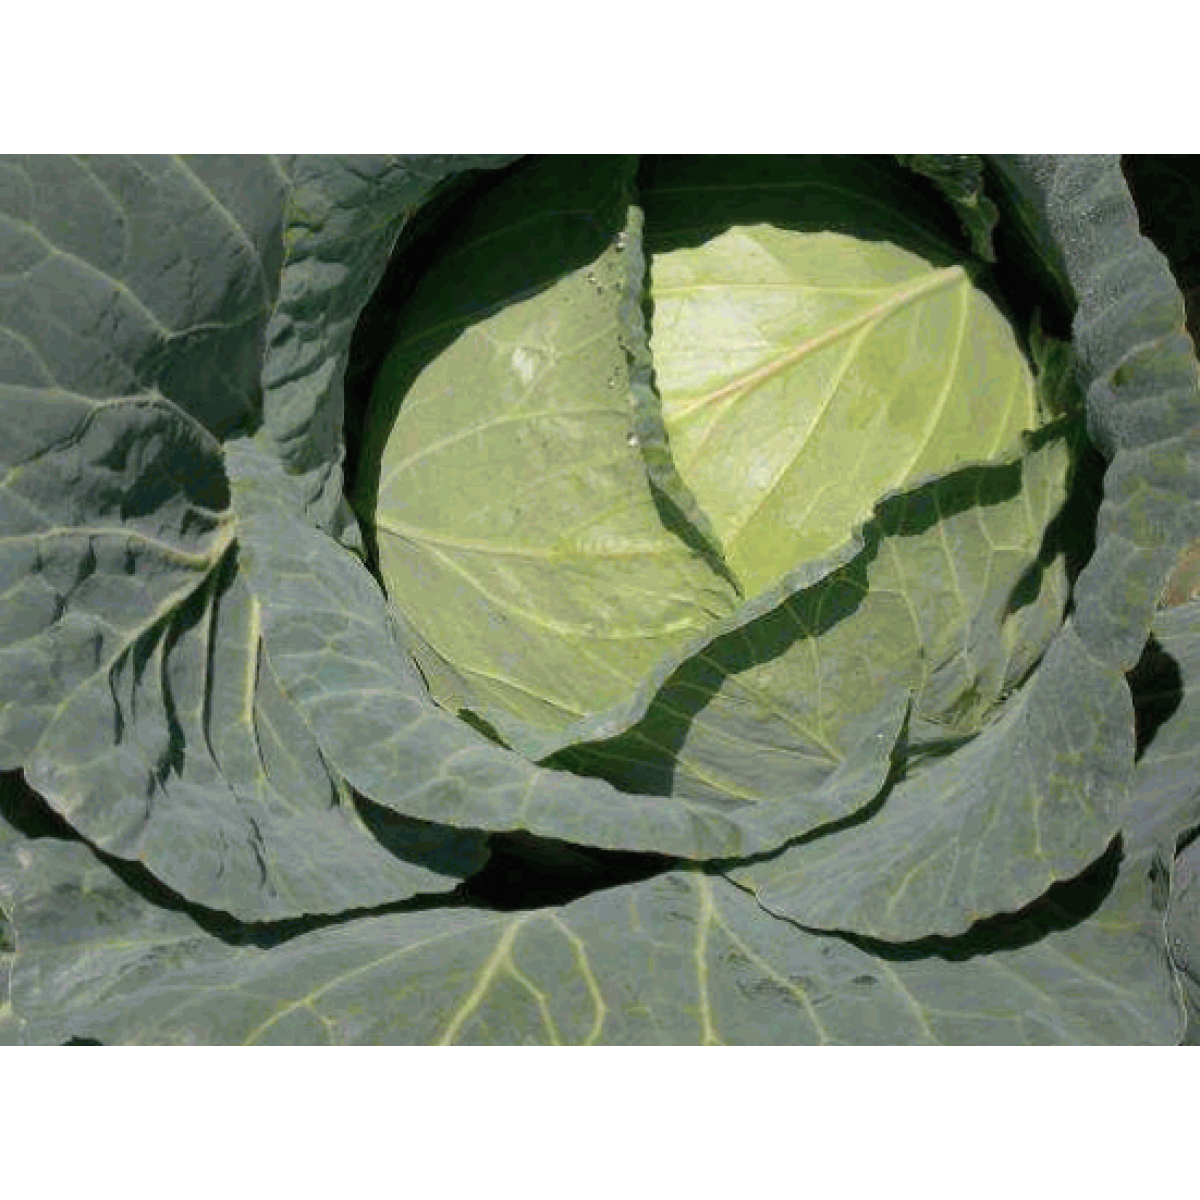 Cabbage Grandslam F1 availability!